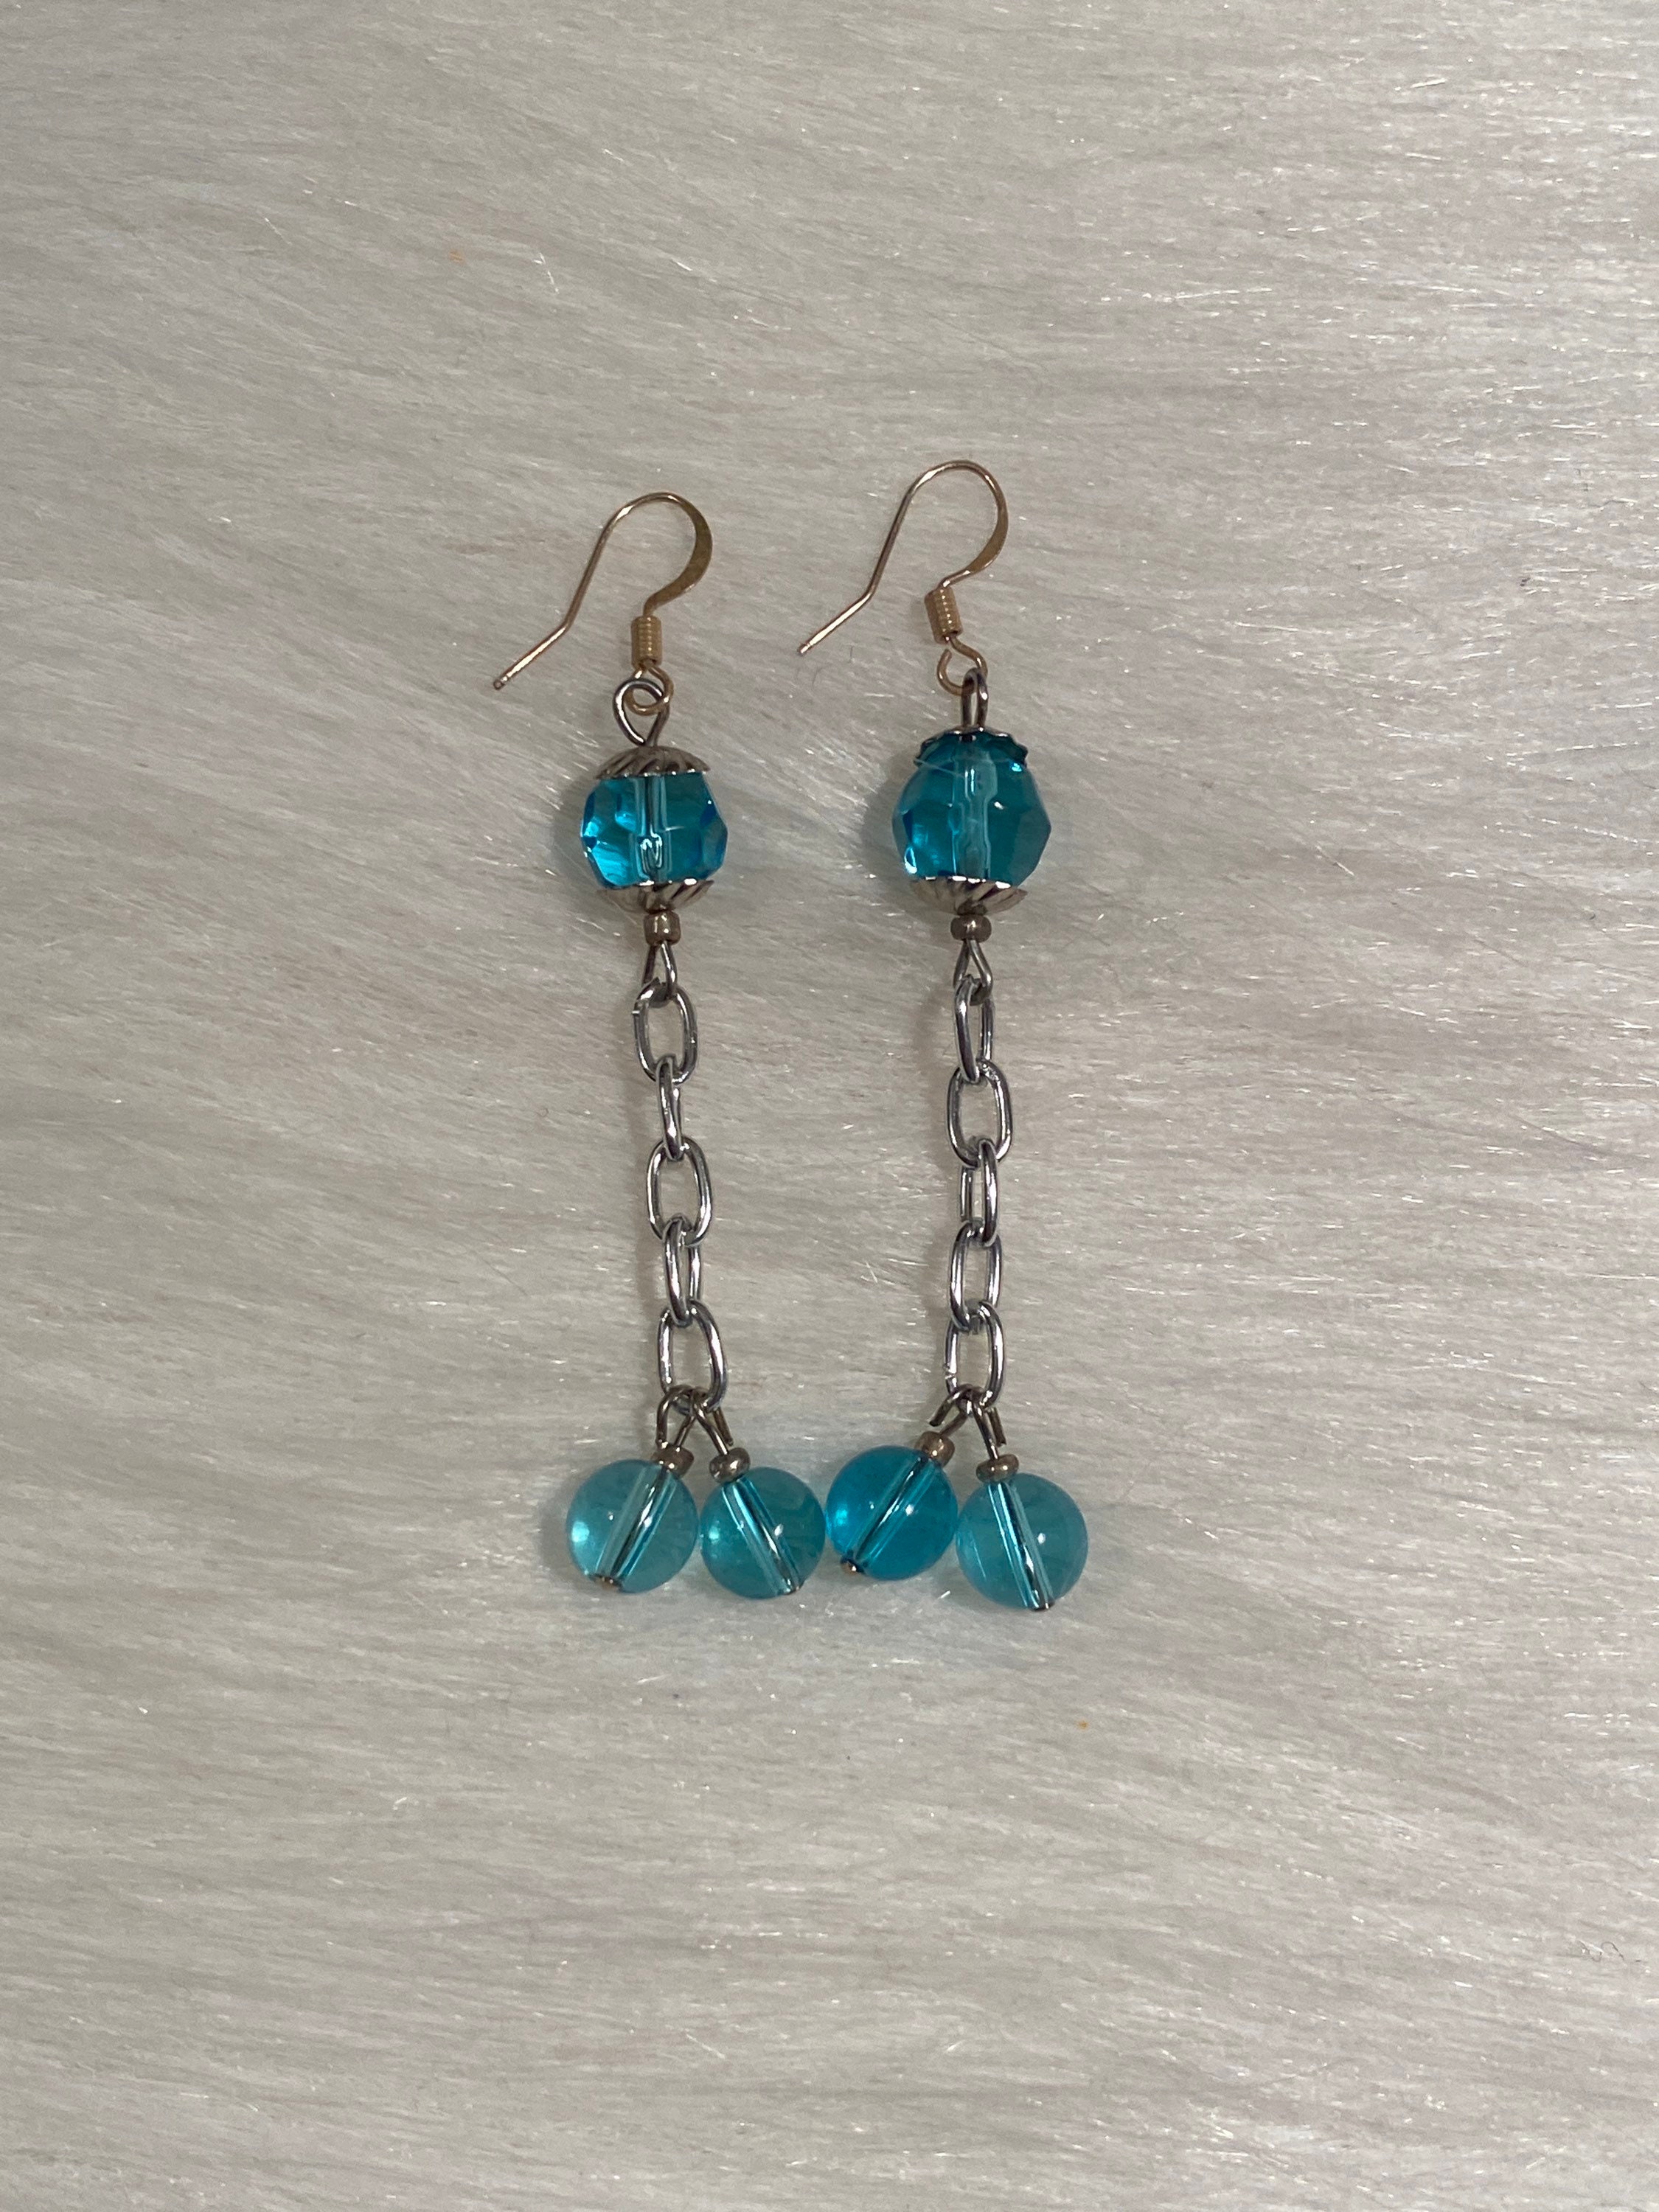 Handmade Earrings Turquoise Small Beads Silver Chain Silver | Etsy